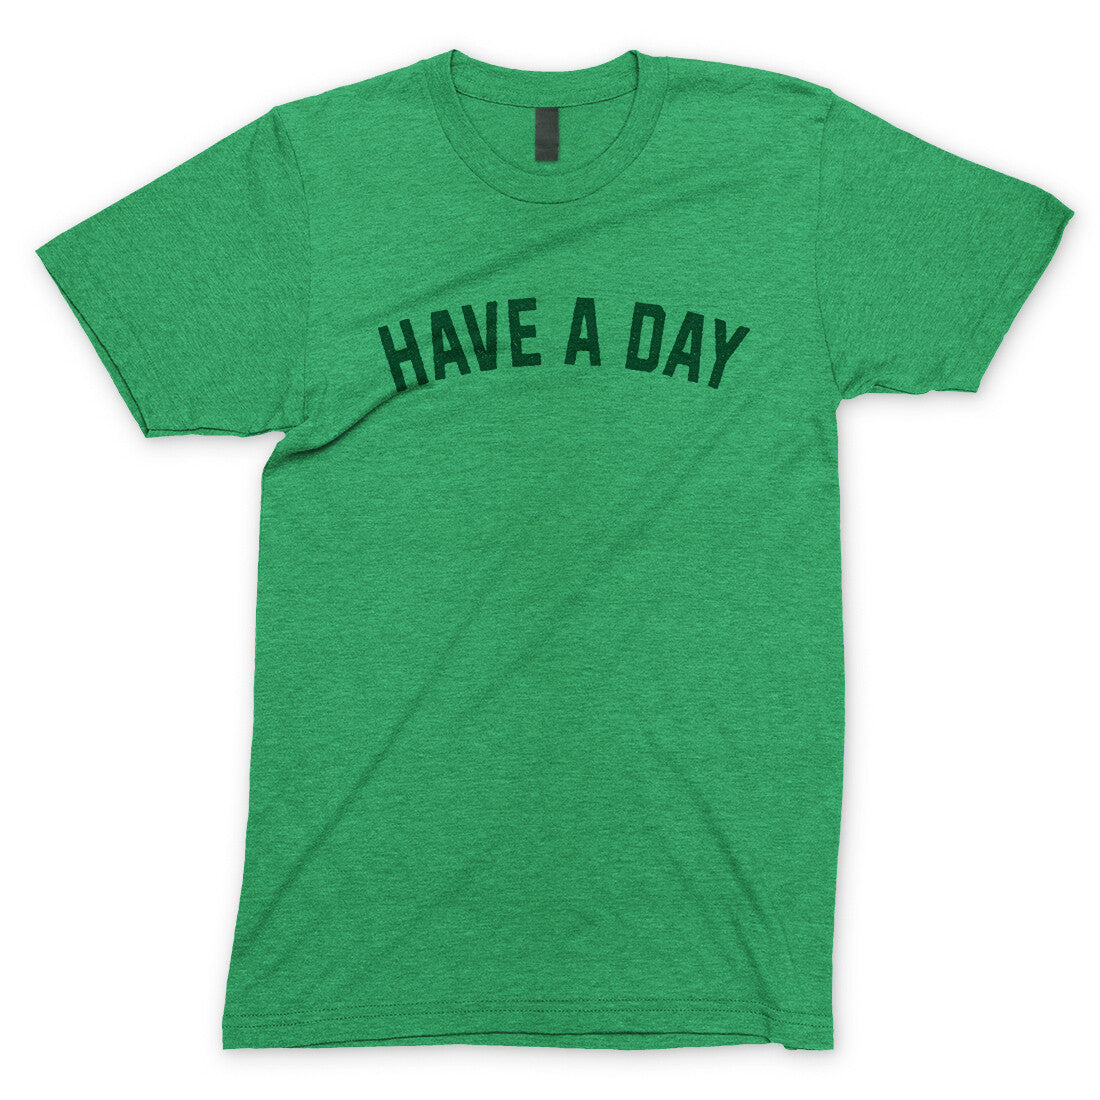 Have a Day in Heather Irish Green Color